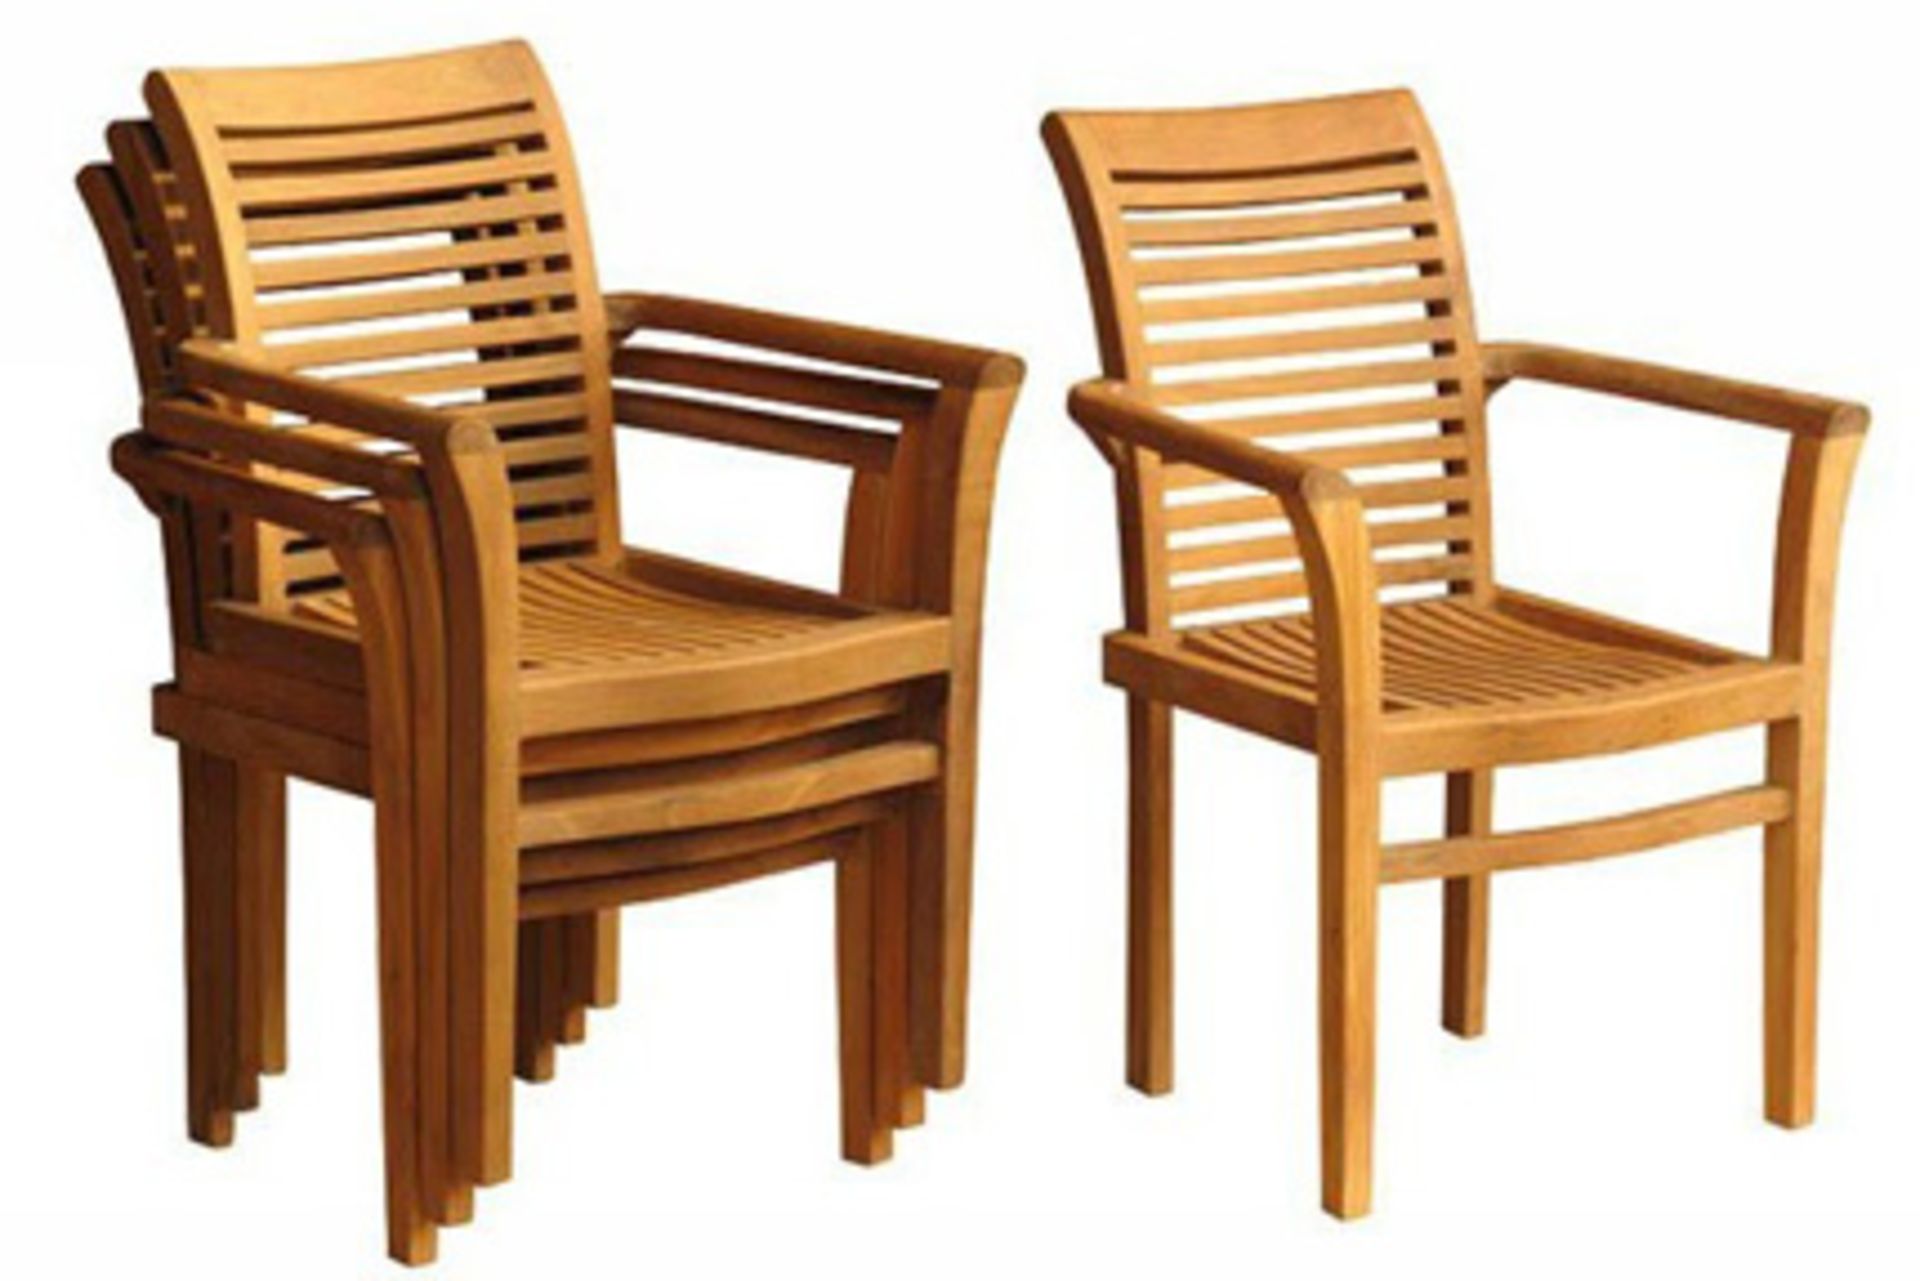 V Brand New NEW STACKING CHAIRS. Strong and sturdy teak stacking chairs made from premium grade